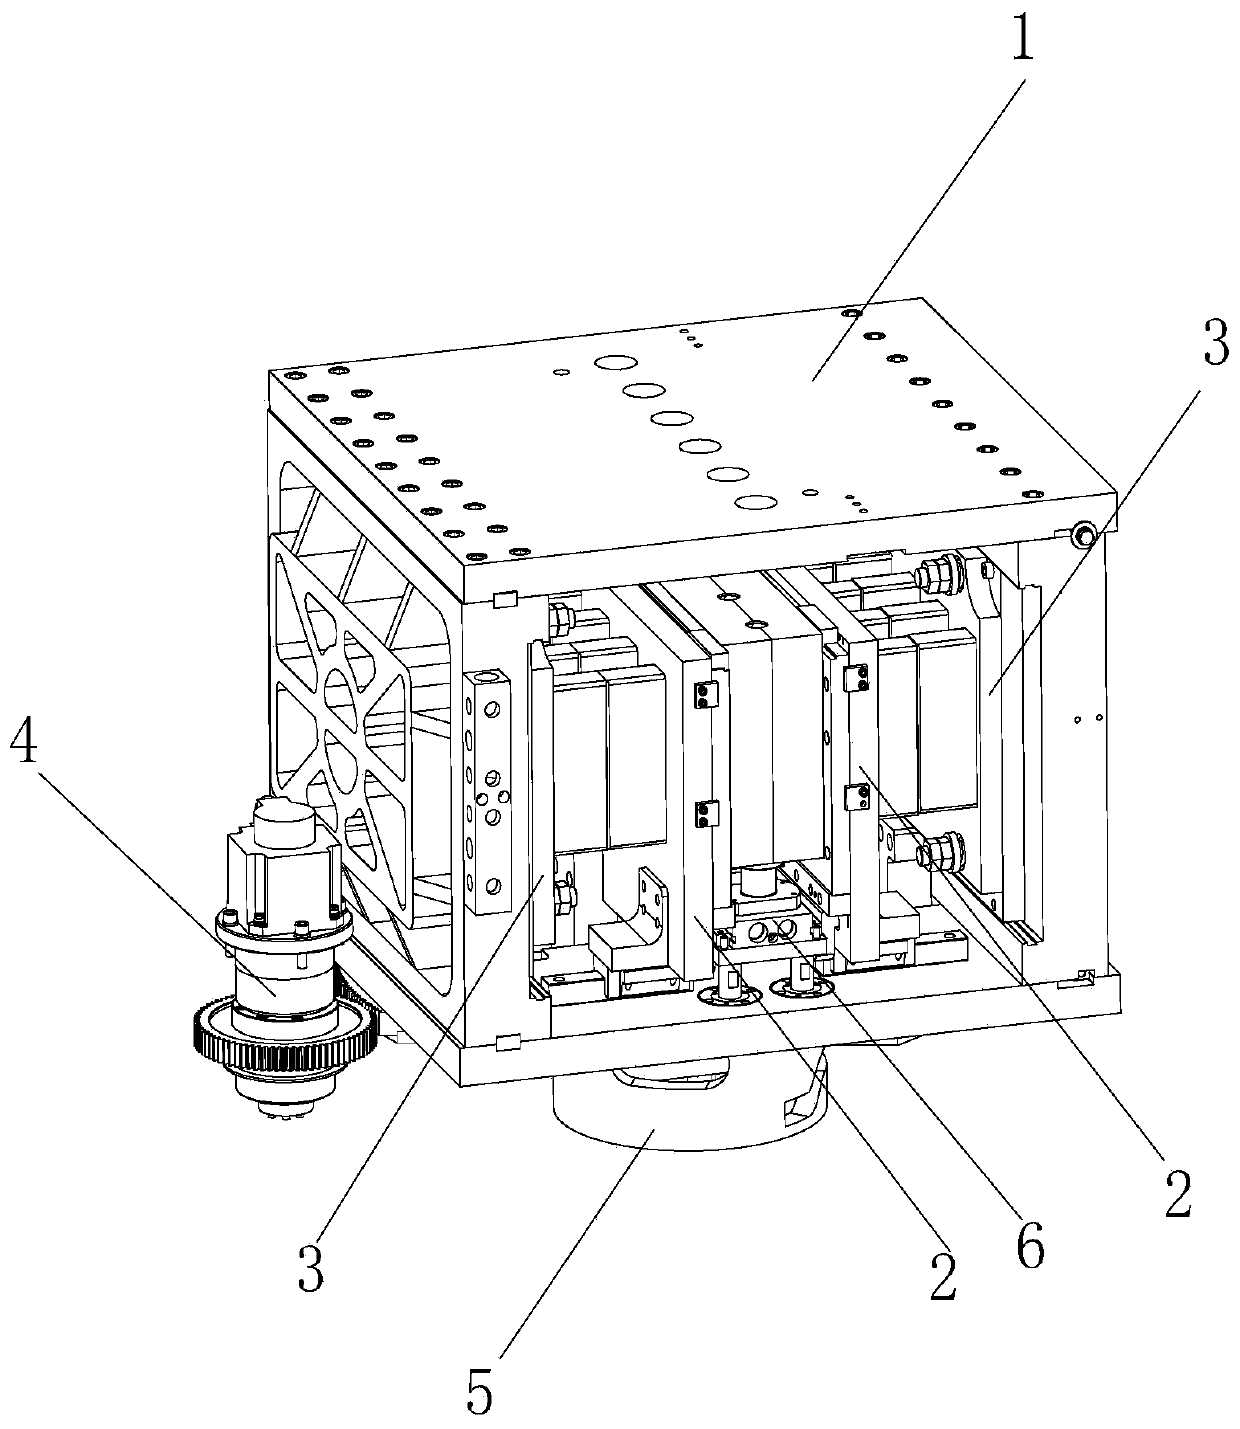 A mold opening and closing device for a bottle blowing machine